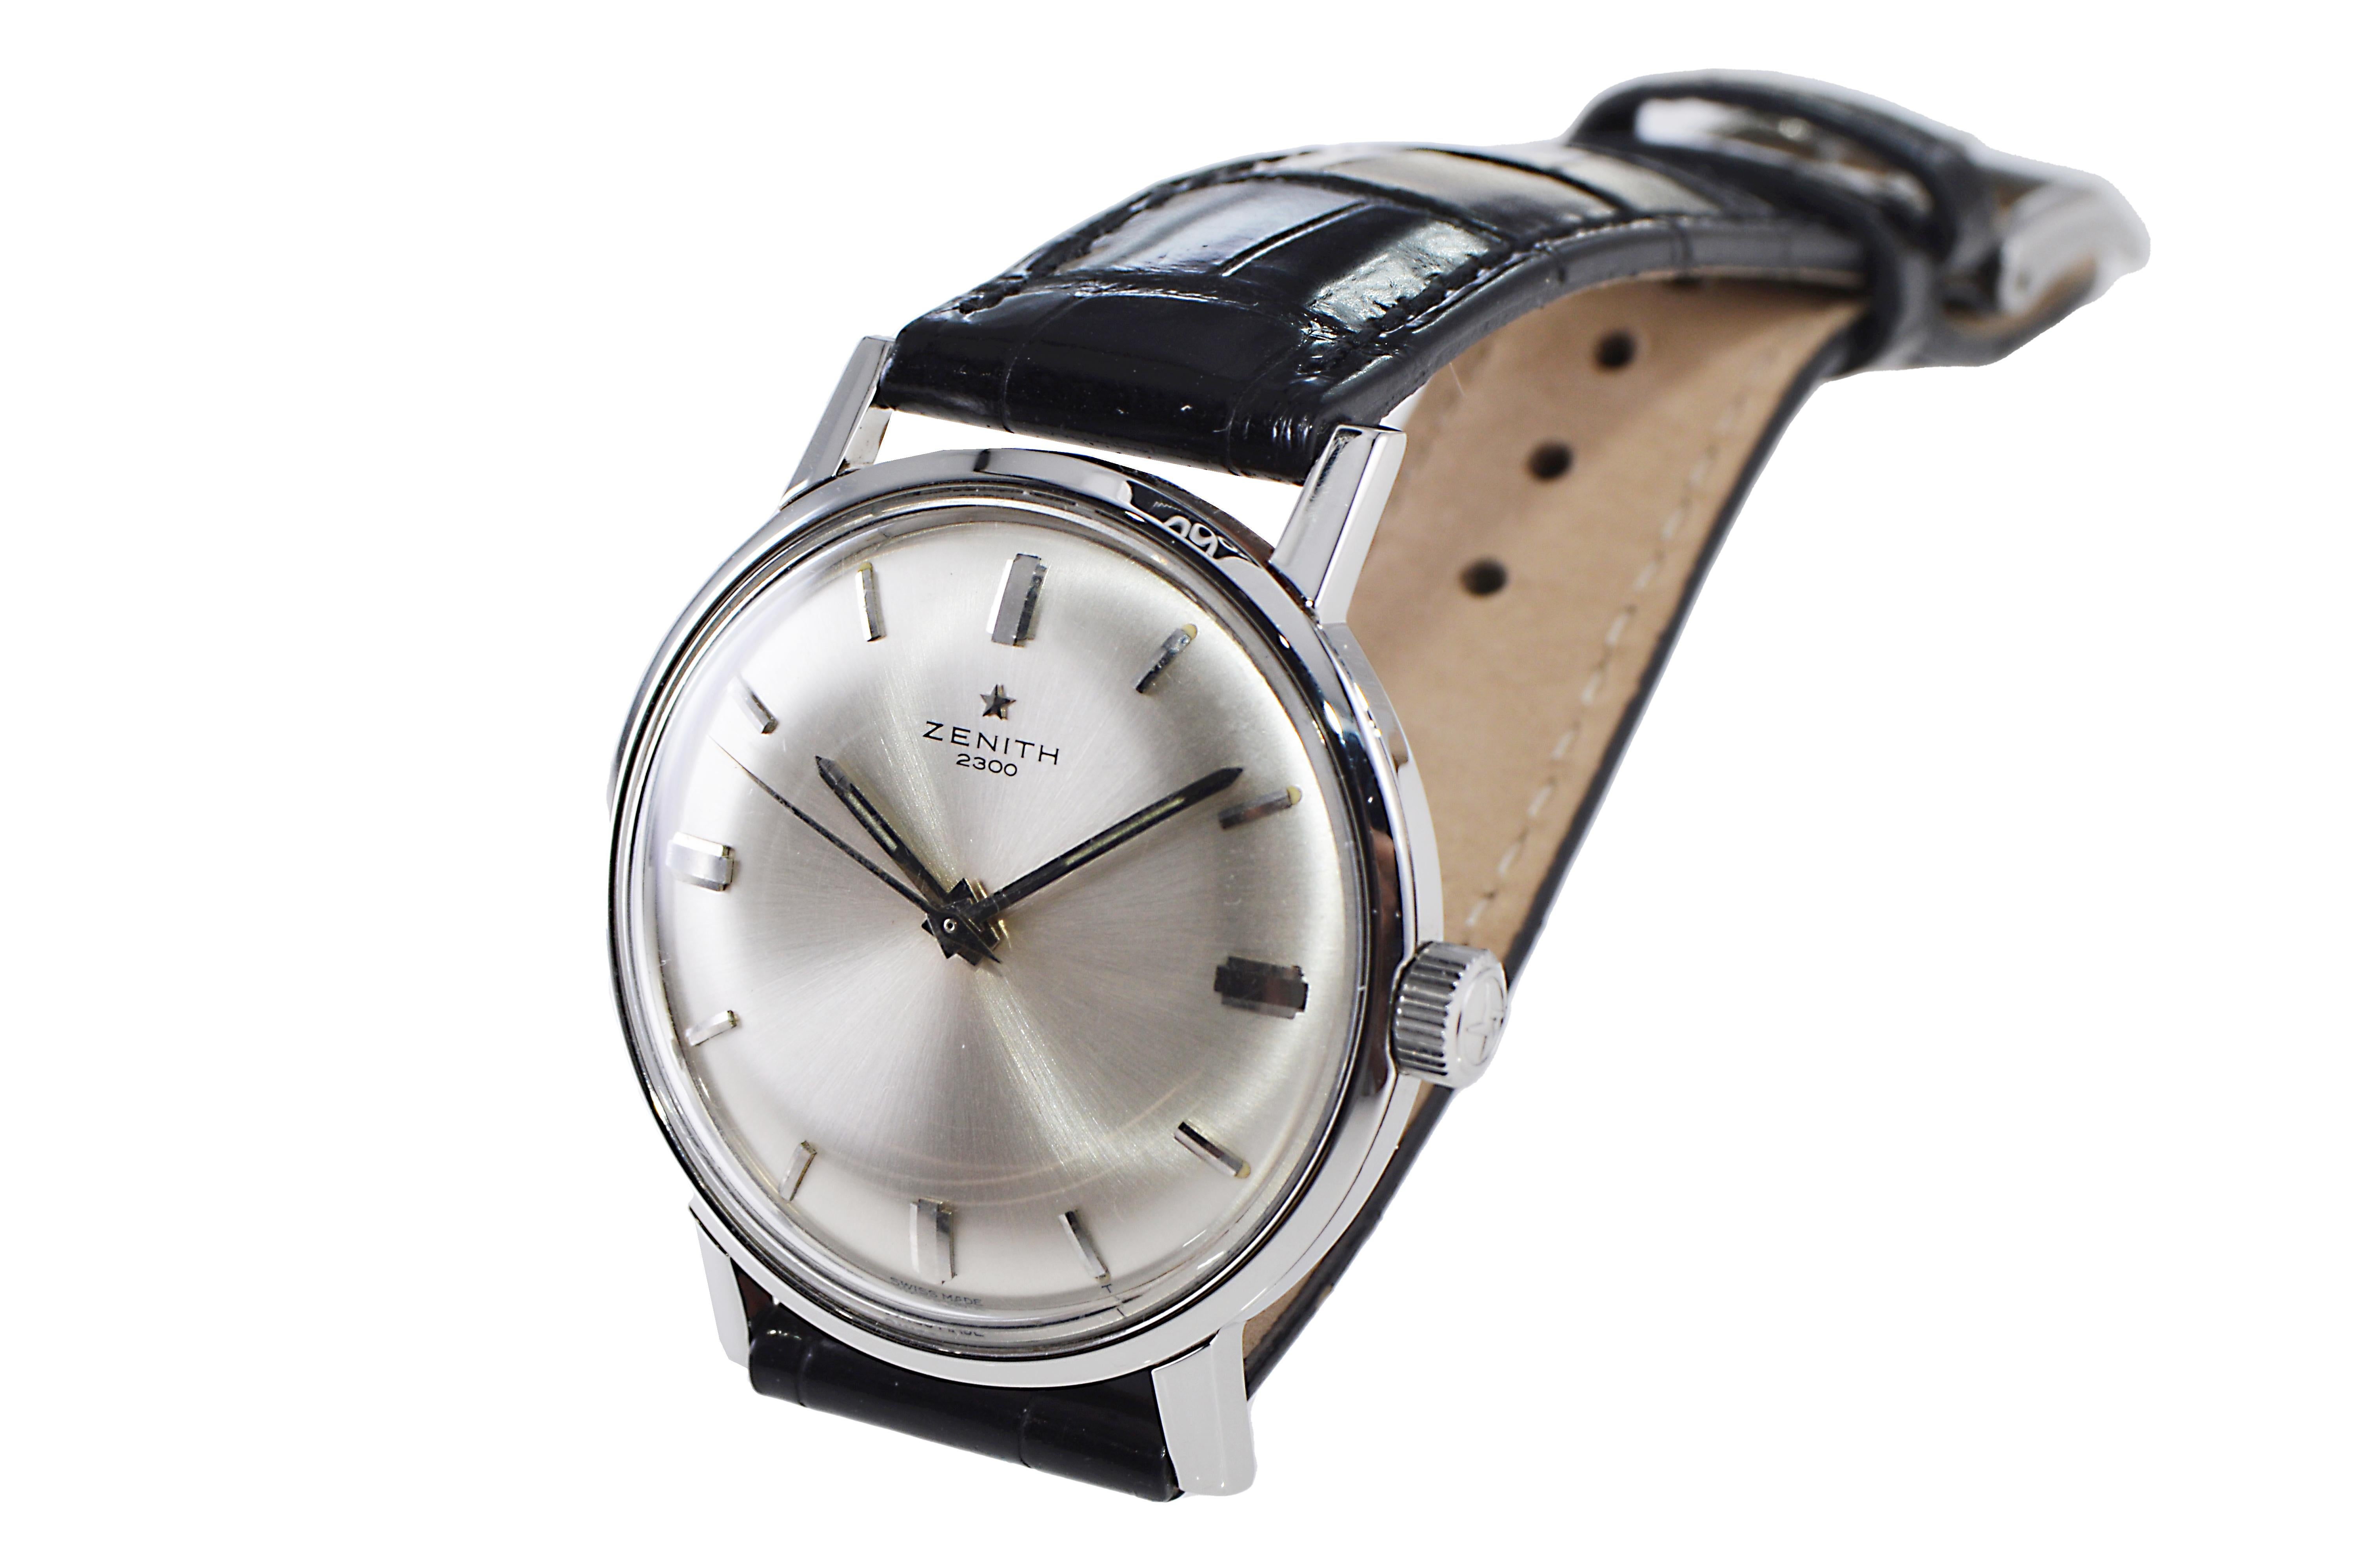 Zenith Stainless Steel Original Dial Manual Wind Watch, circa 1950s For Sale 1